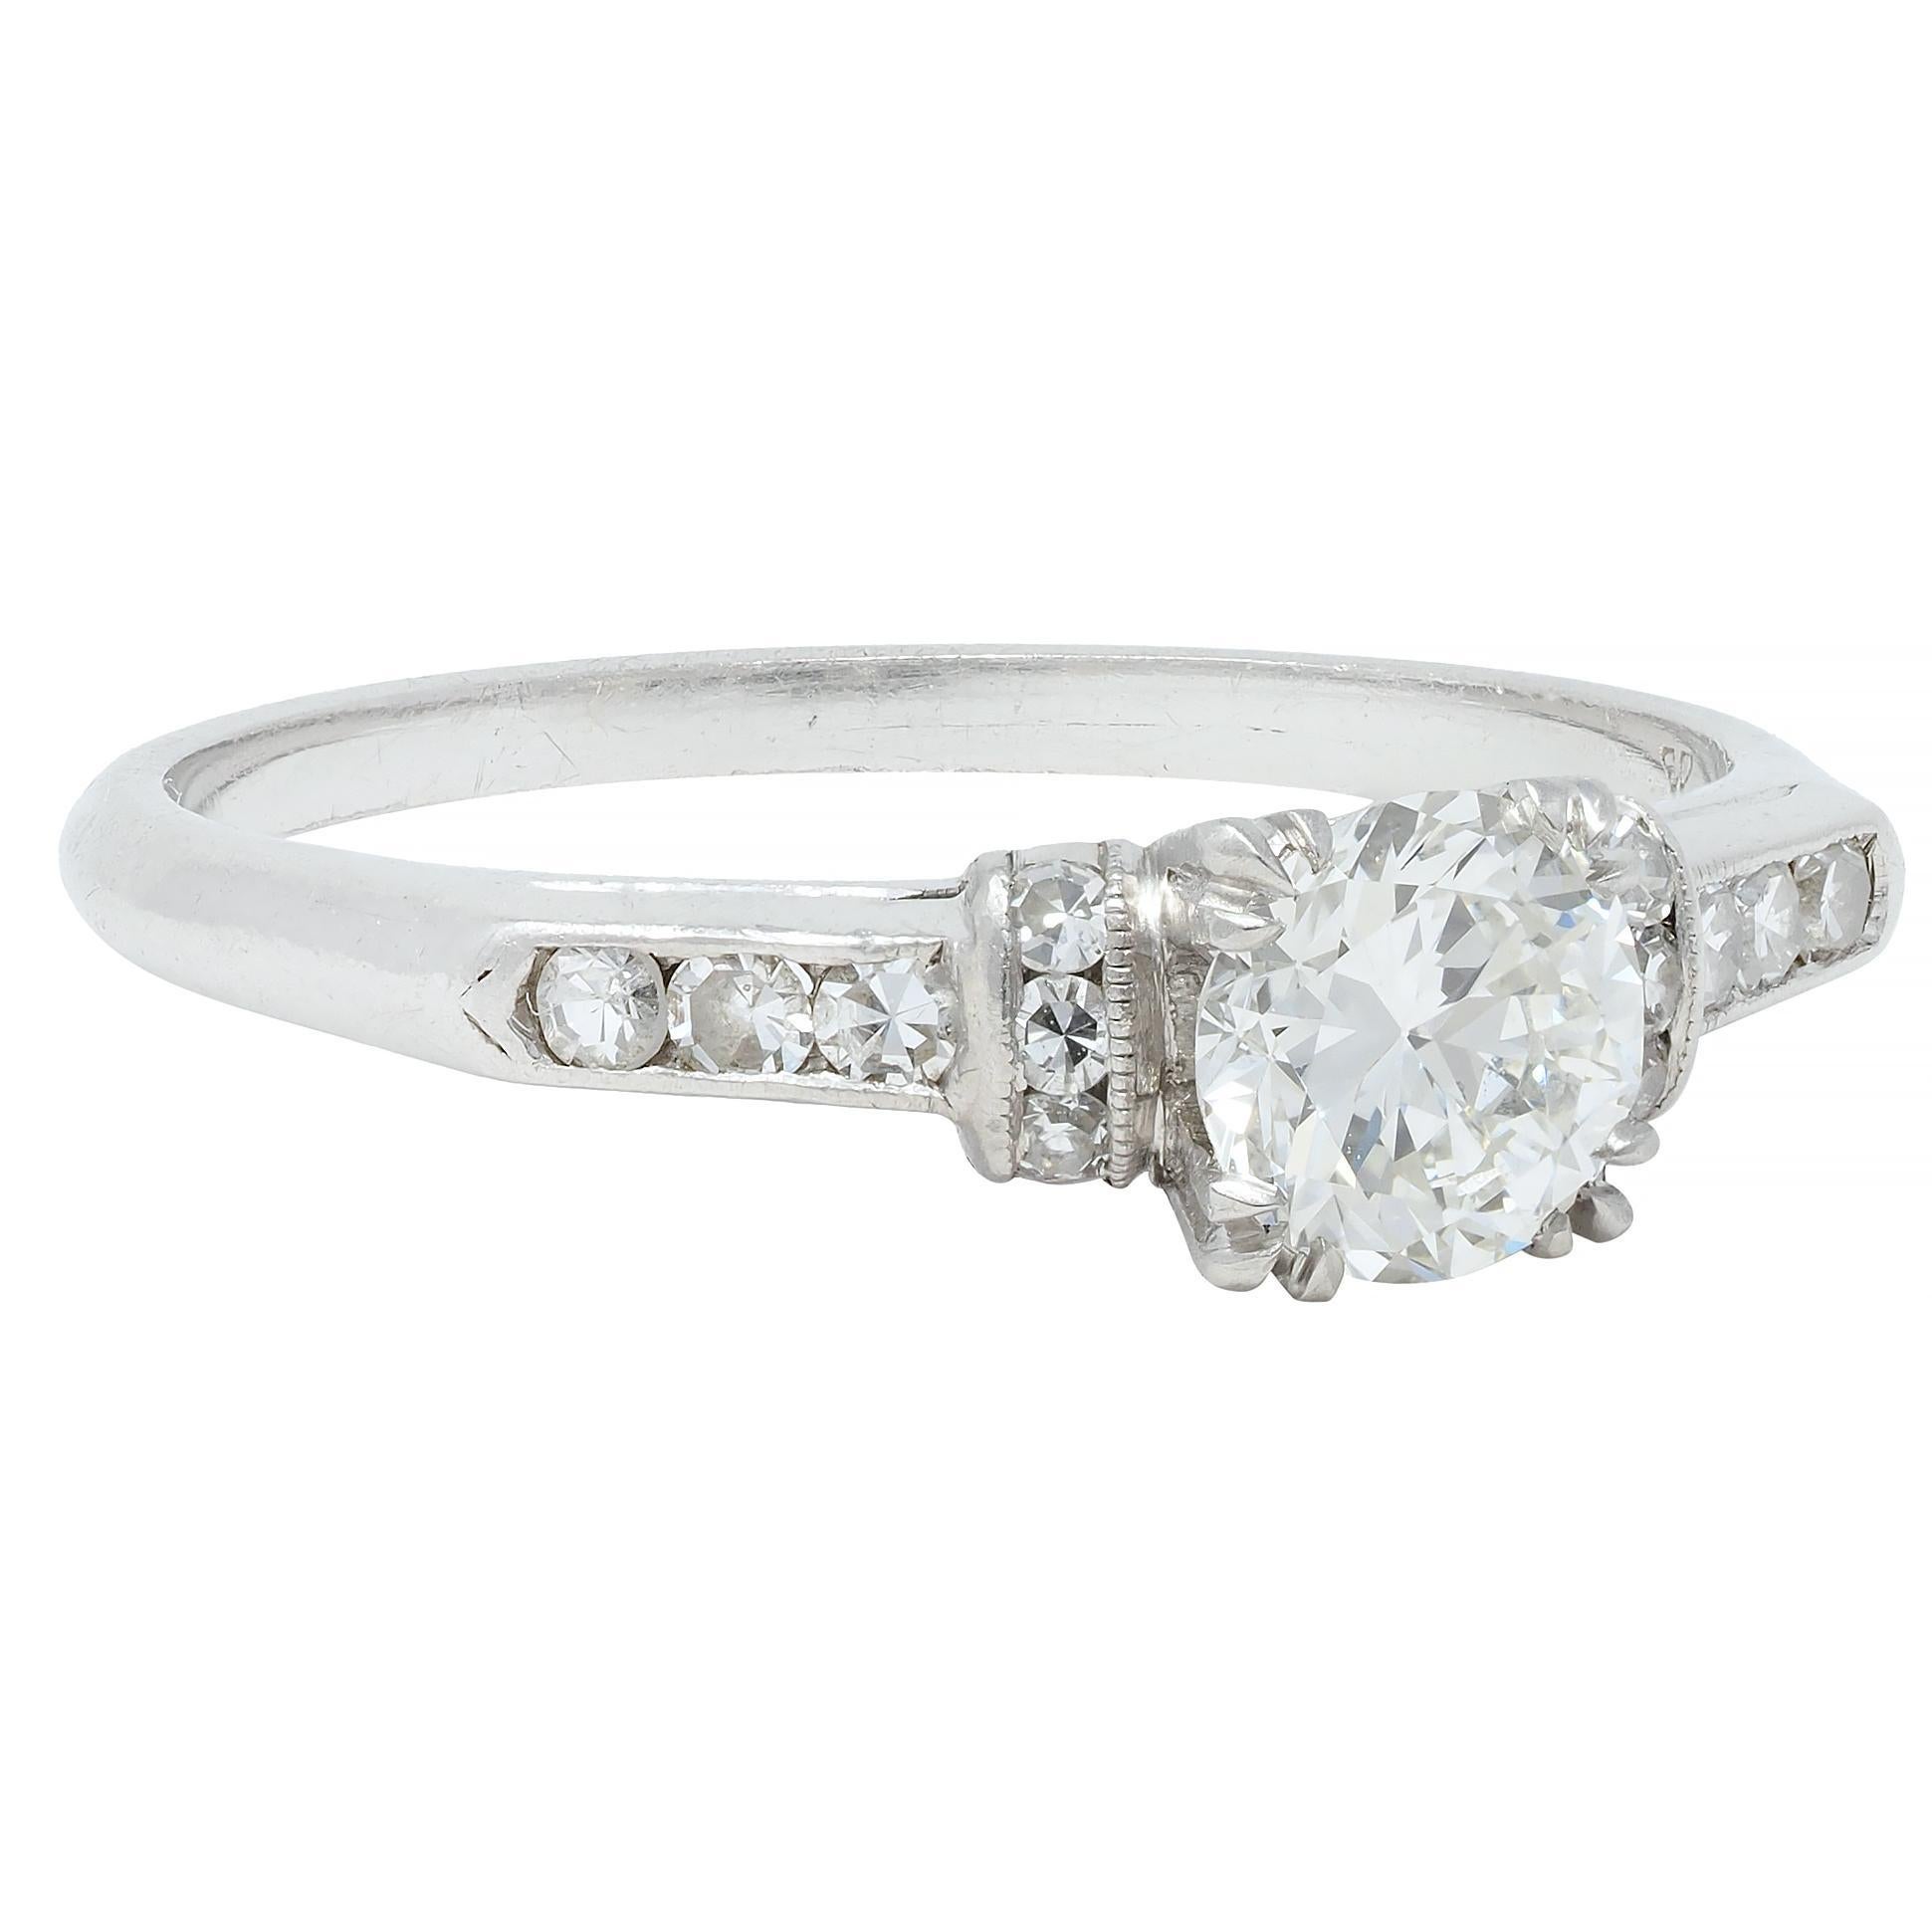 Centering a transitional cut diamond weighing approximately 0.60 carat total - G color with VS2 clarity
Set with tri-split prongs in a square form basket - pierced with a 'W' motif profile 
Flanked by rounded arches and cathedral shoulders set with